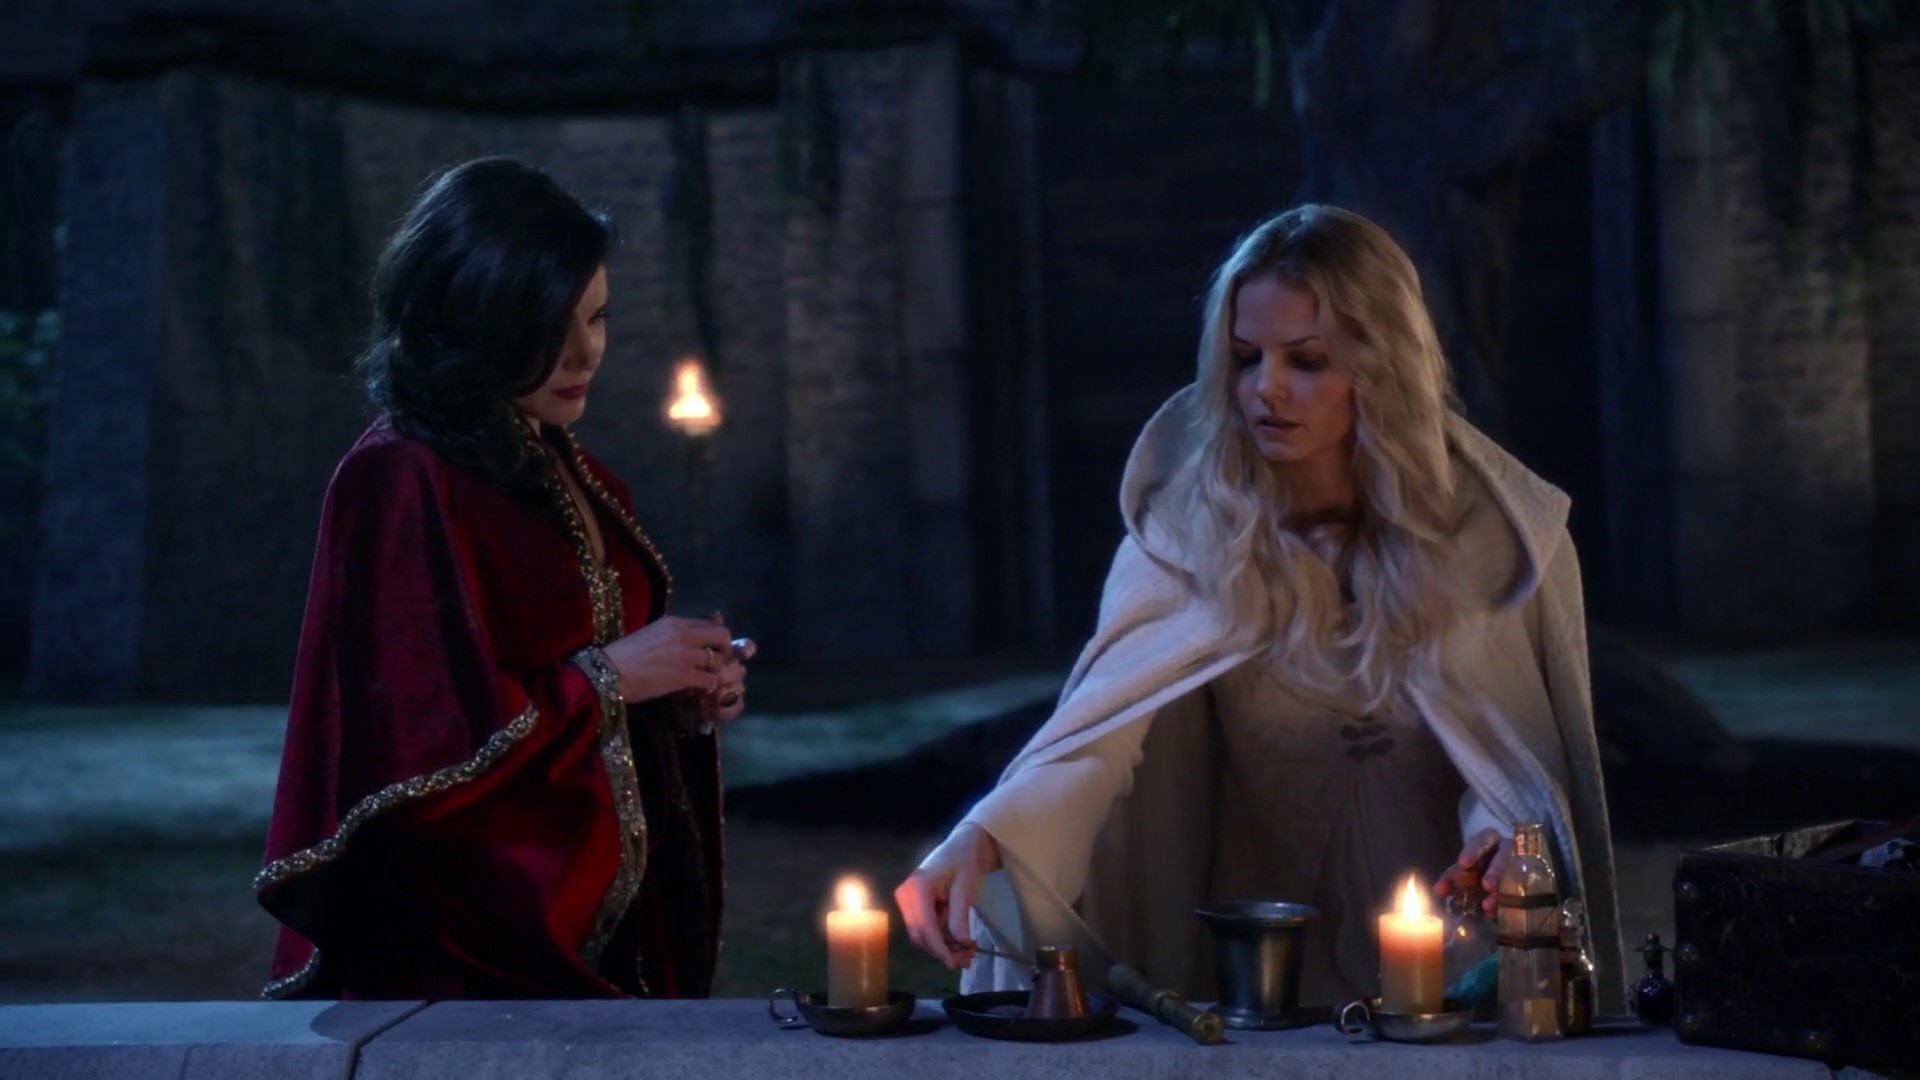 1920x1080 Once Upon a Time 5x05 Dreamcatcher - Regina and Emma cooking potions and  freeing Merlin